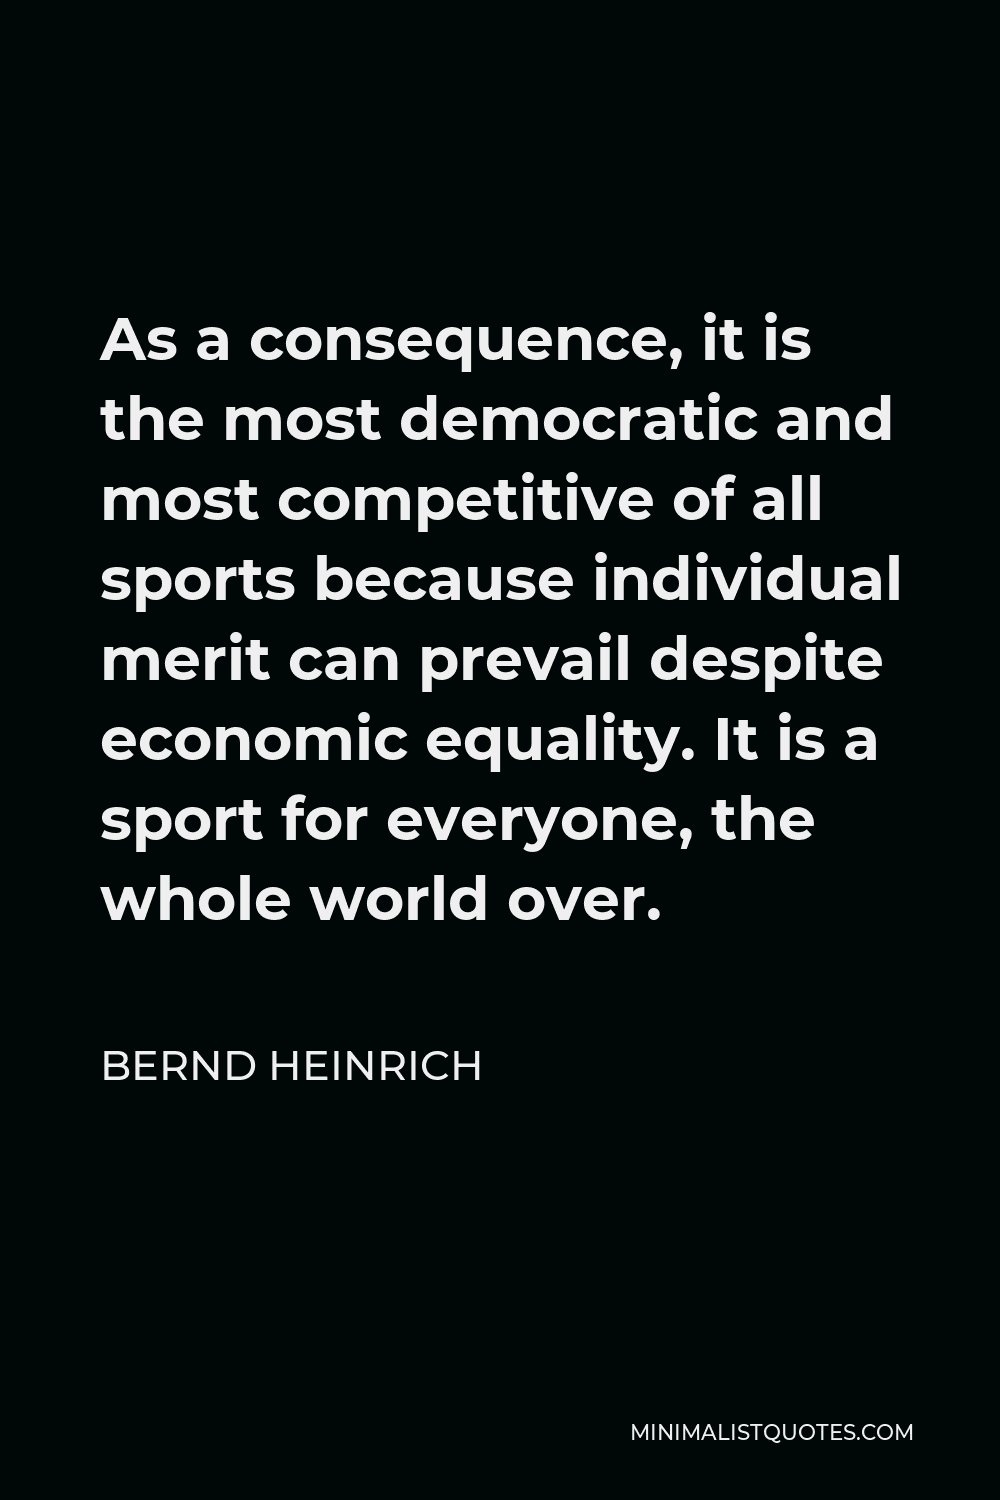 Bernd Heinrich Quote - As a consequence, it is the most democratic and most competitive of all sports because individual merit can prevail despite economic equality. It is a sport for everyone, the whole world over.